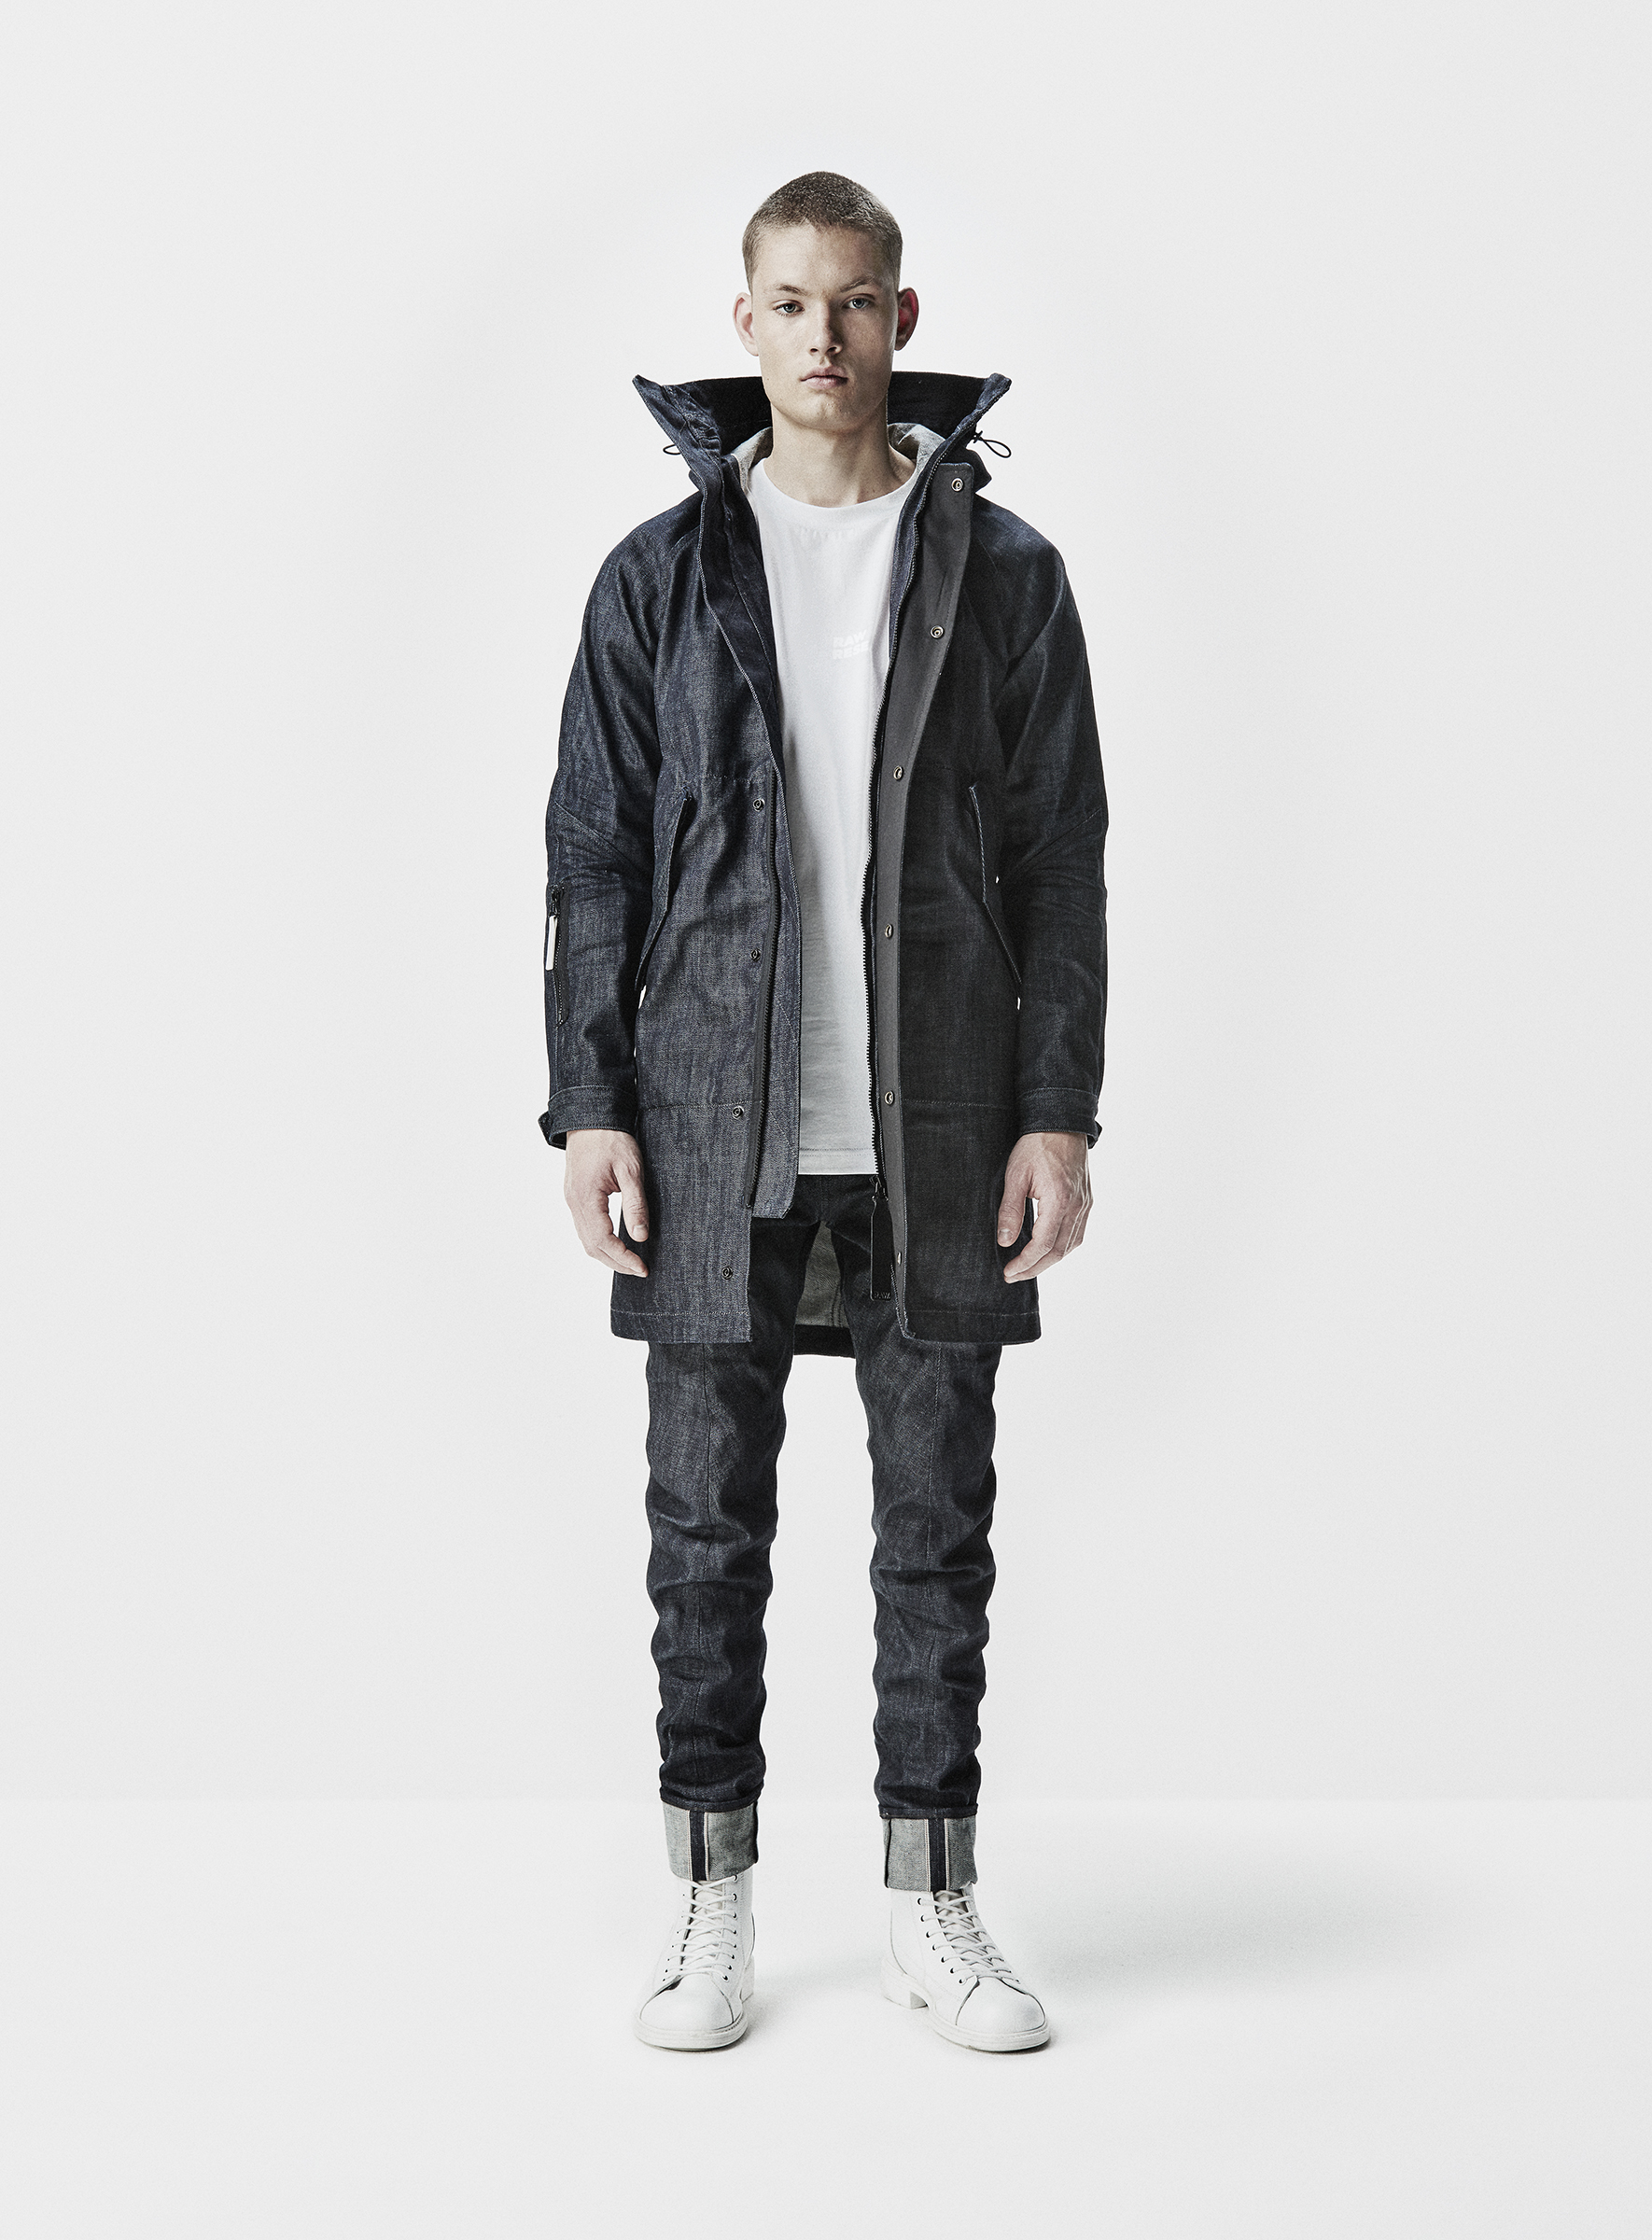 G Star Raw Research 2